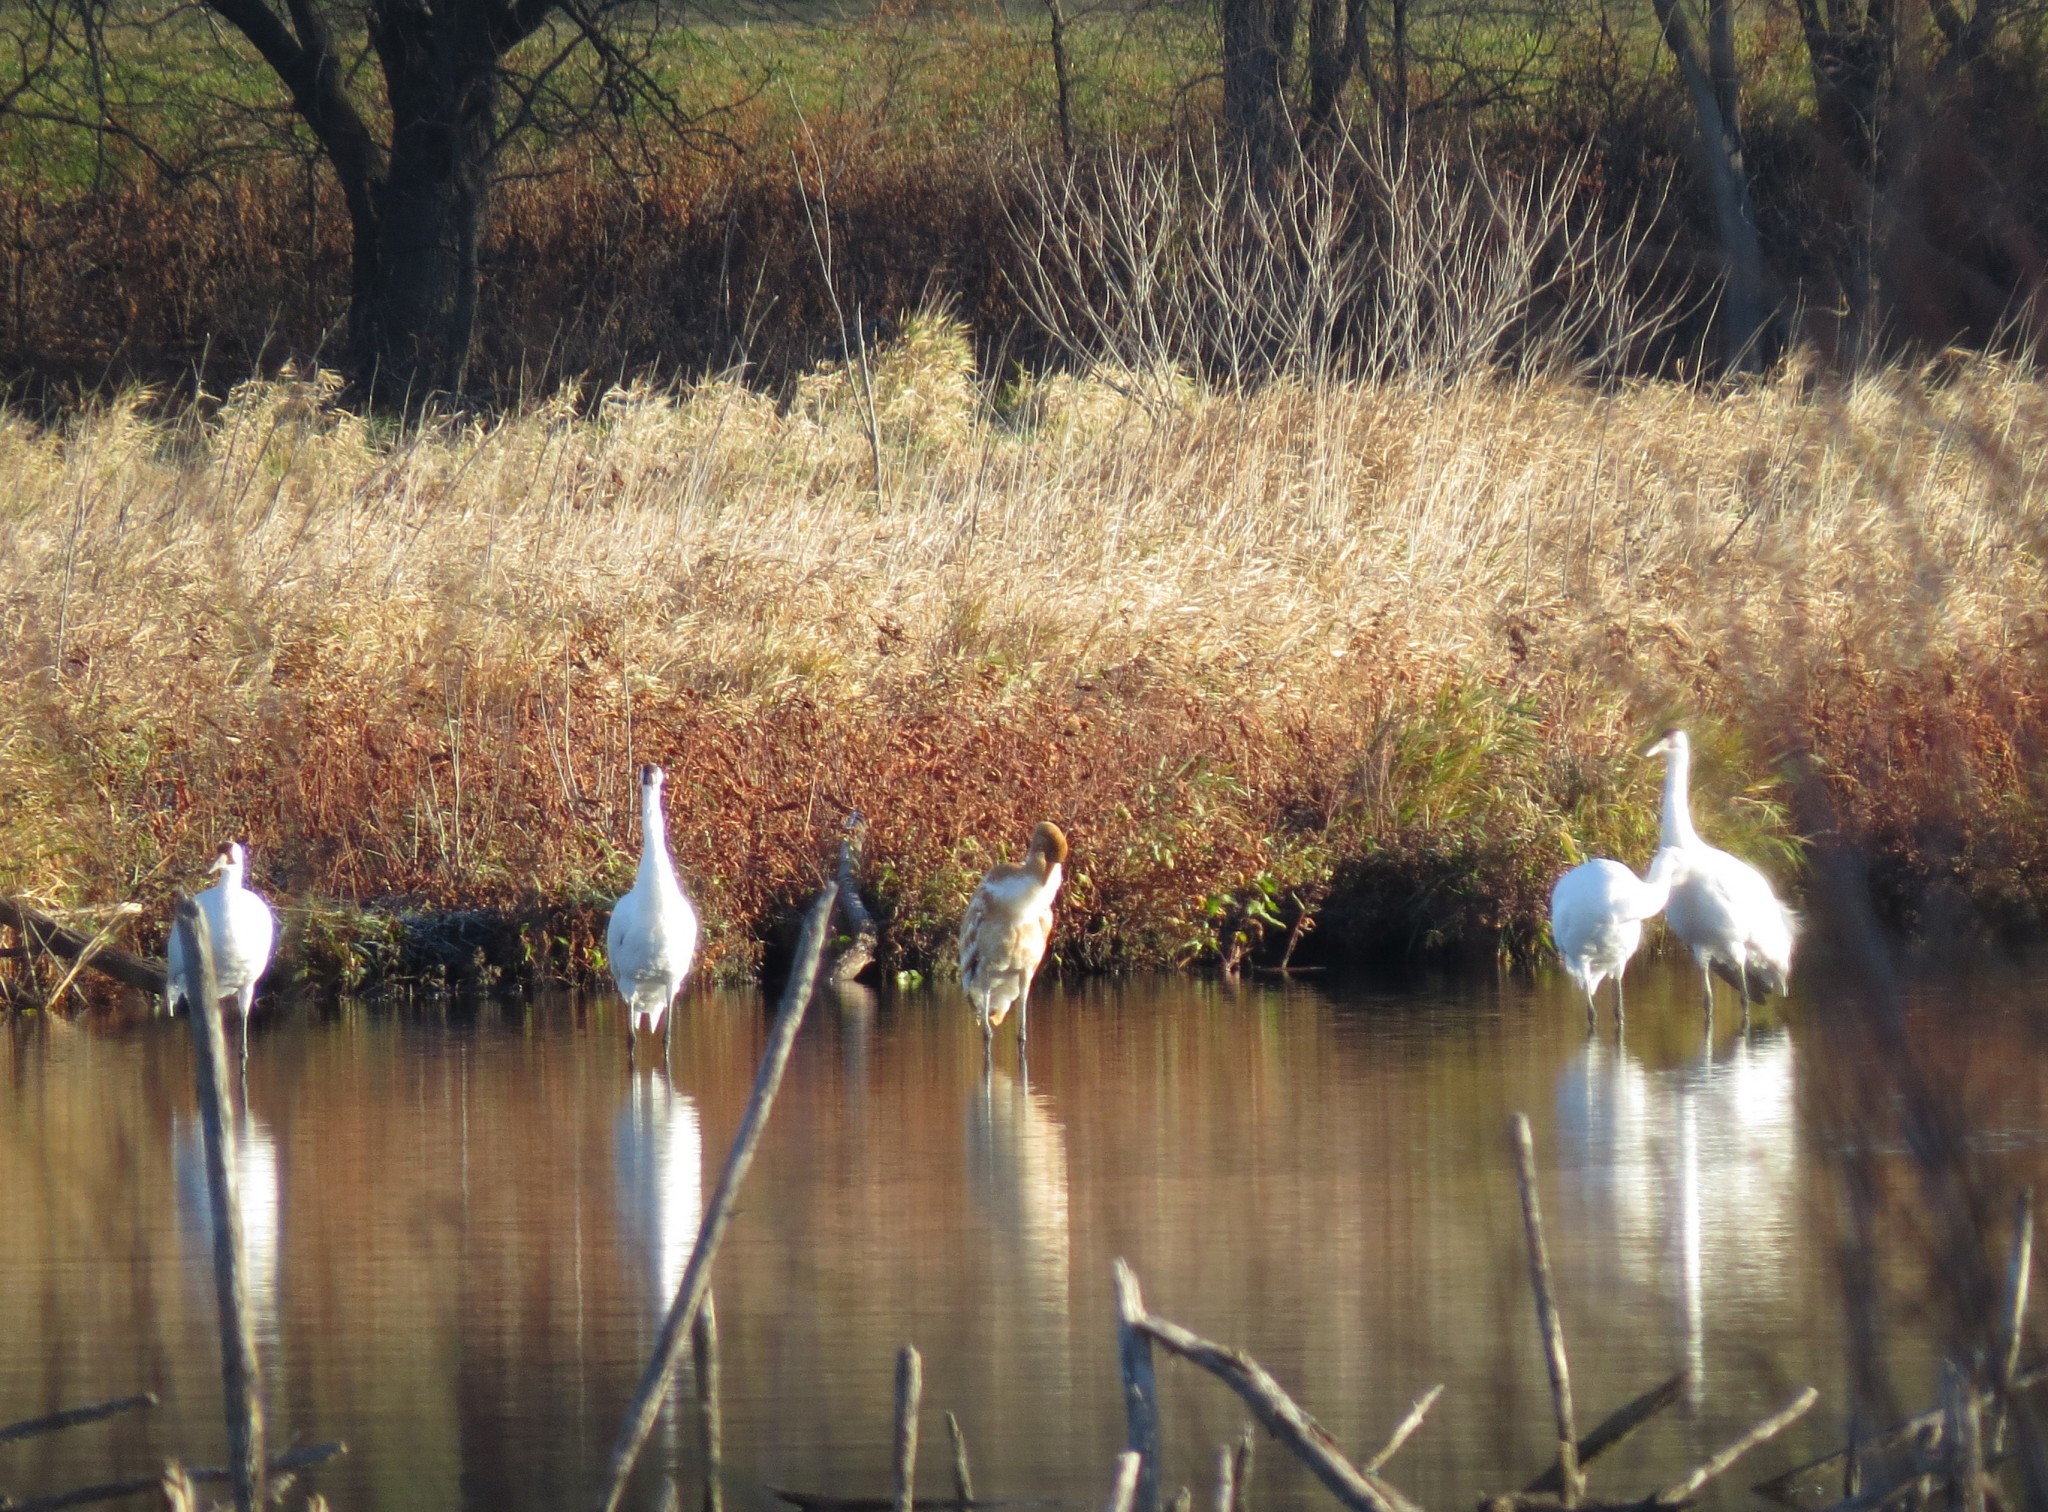 The Branched Oak Lake Whooping Cranes on 13 November 2015